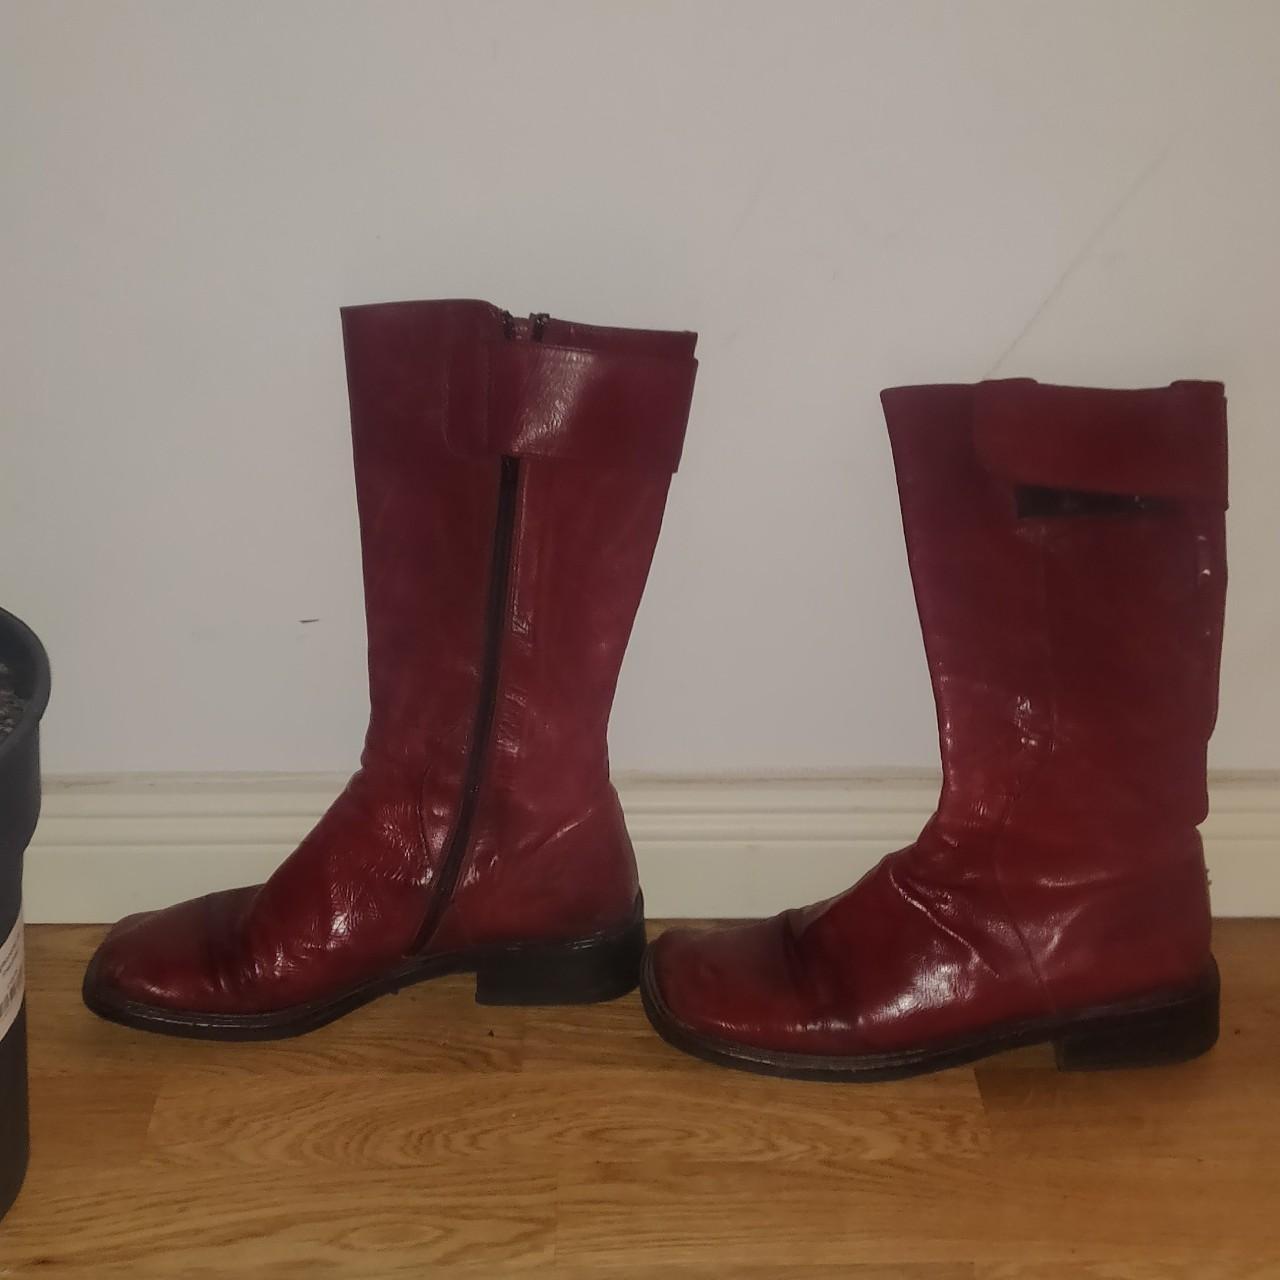 Gorgeous dark red square toe boots in excellent... - Depop